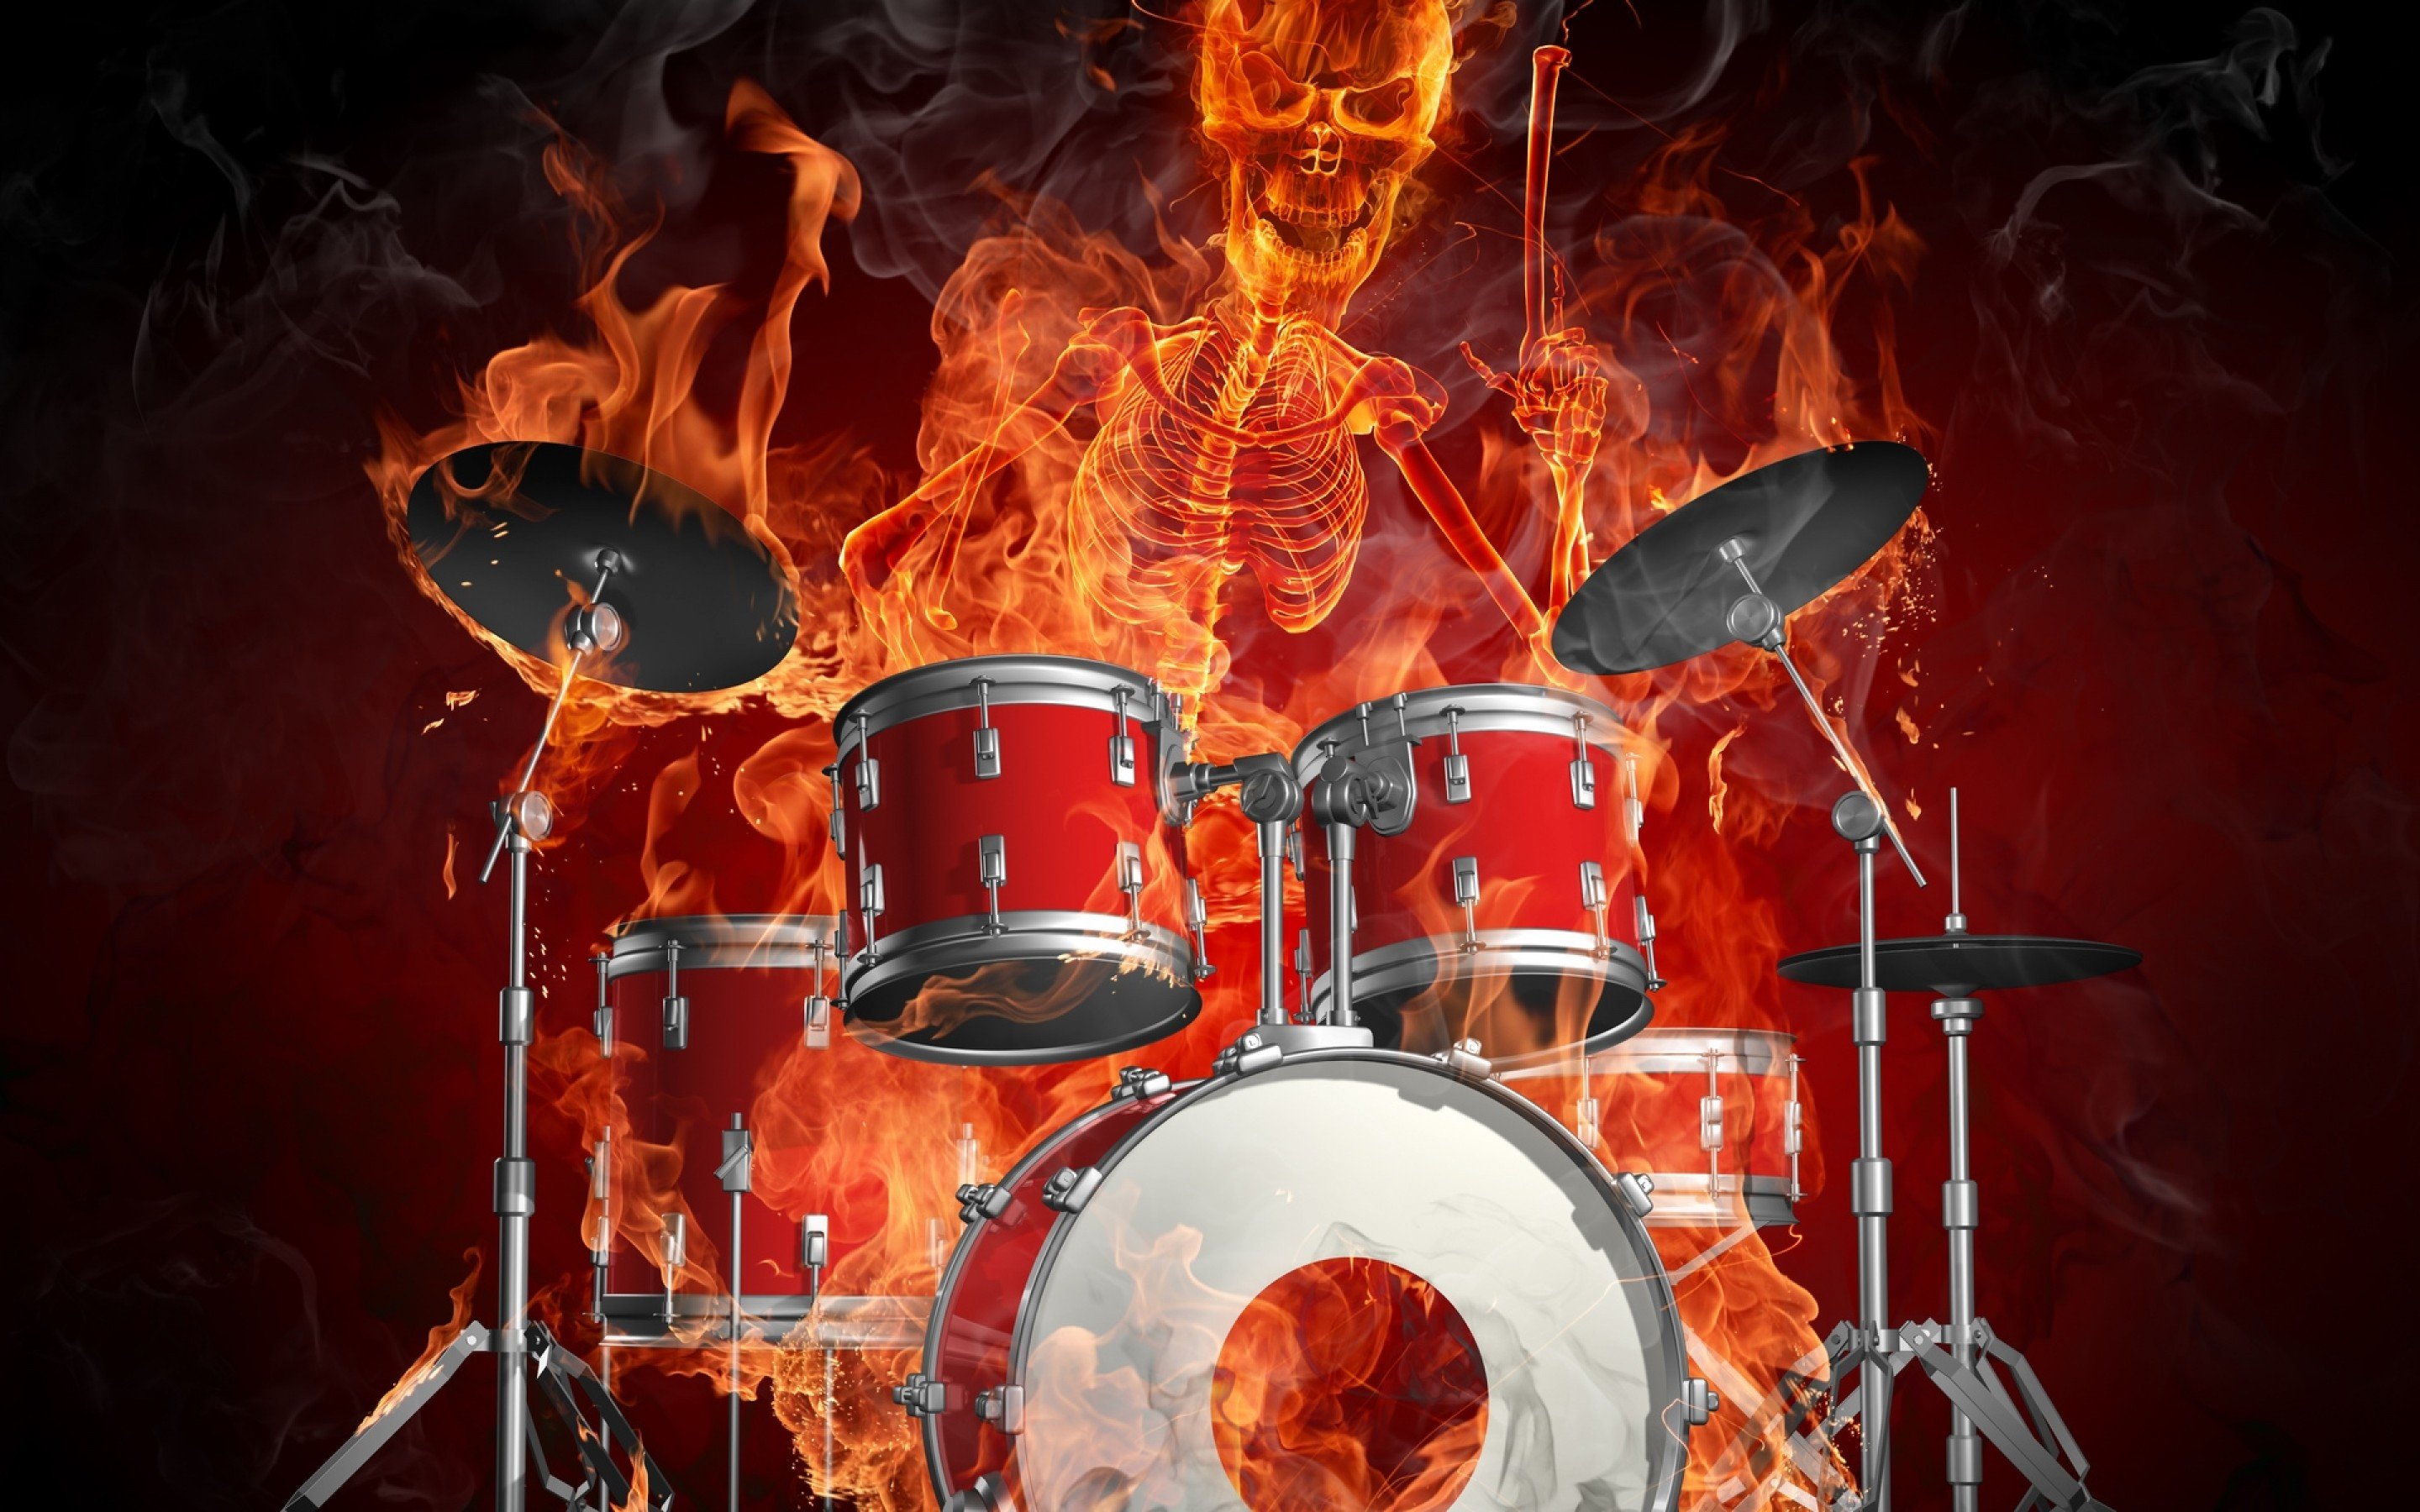 Download 2880x1800 Fire Skeleton, Drums, Smoke, Smiling Wallpaper for MacBook Pro 15 inch